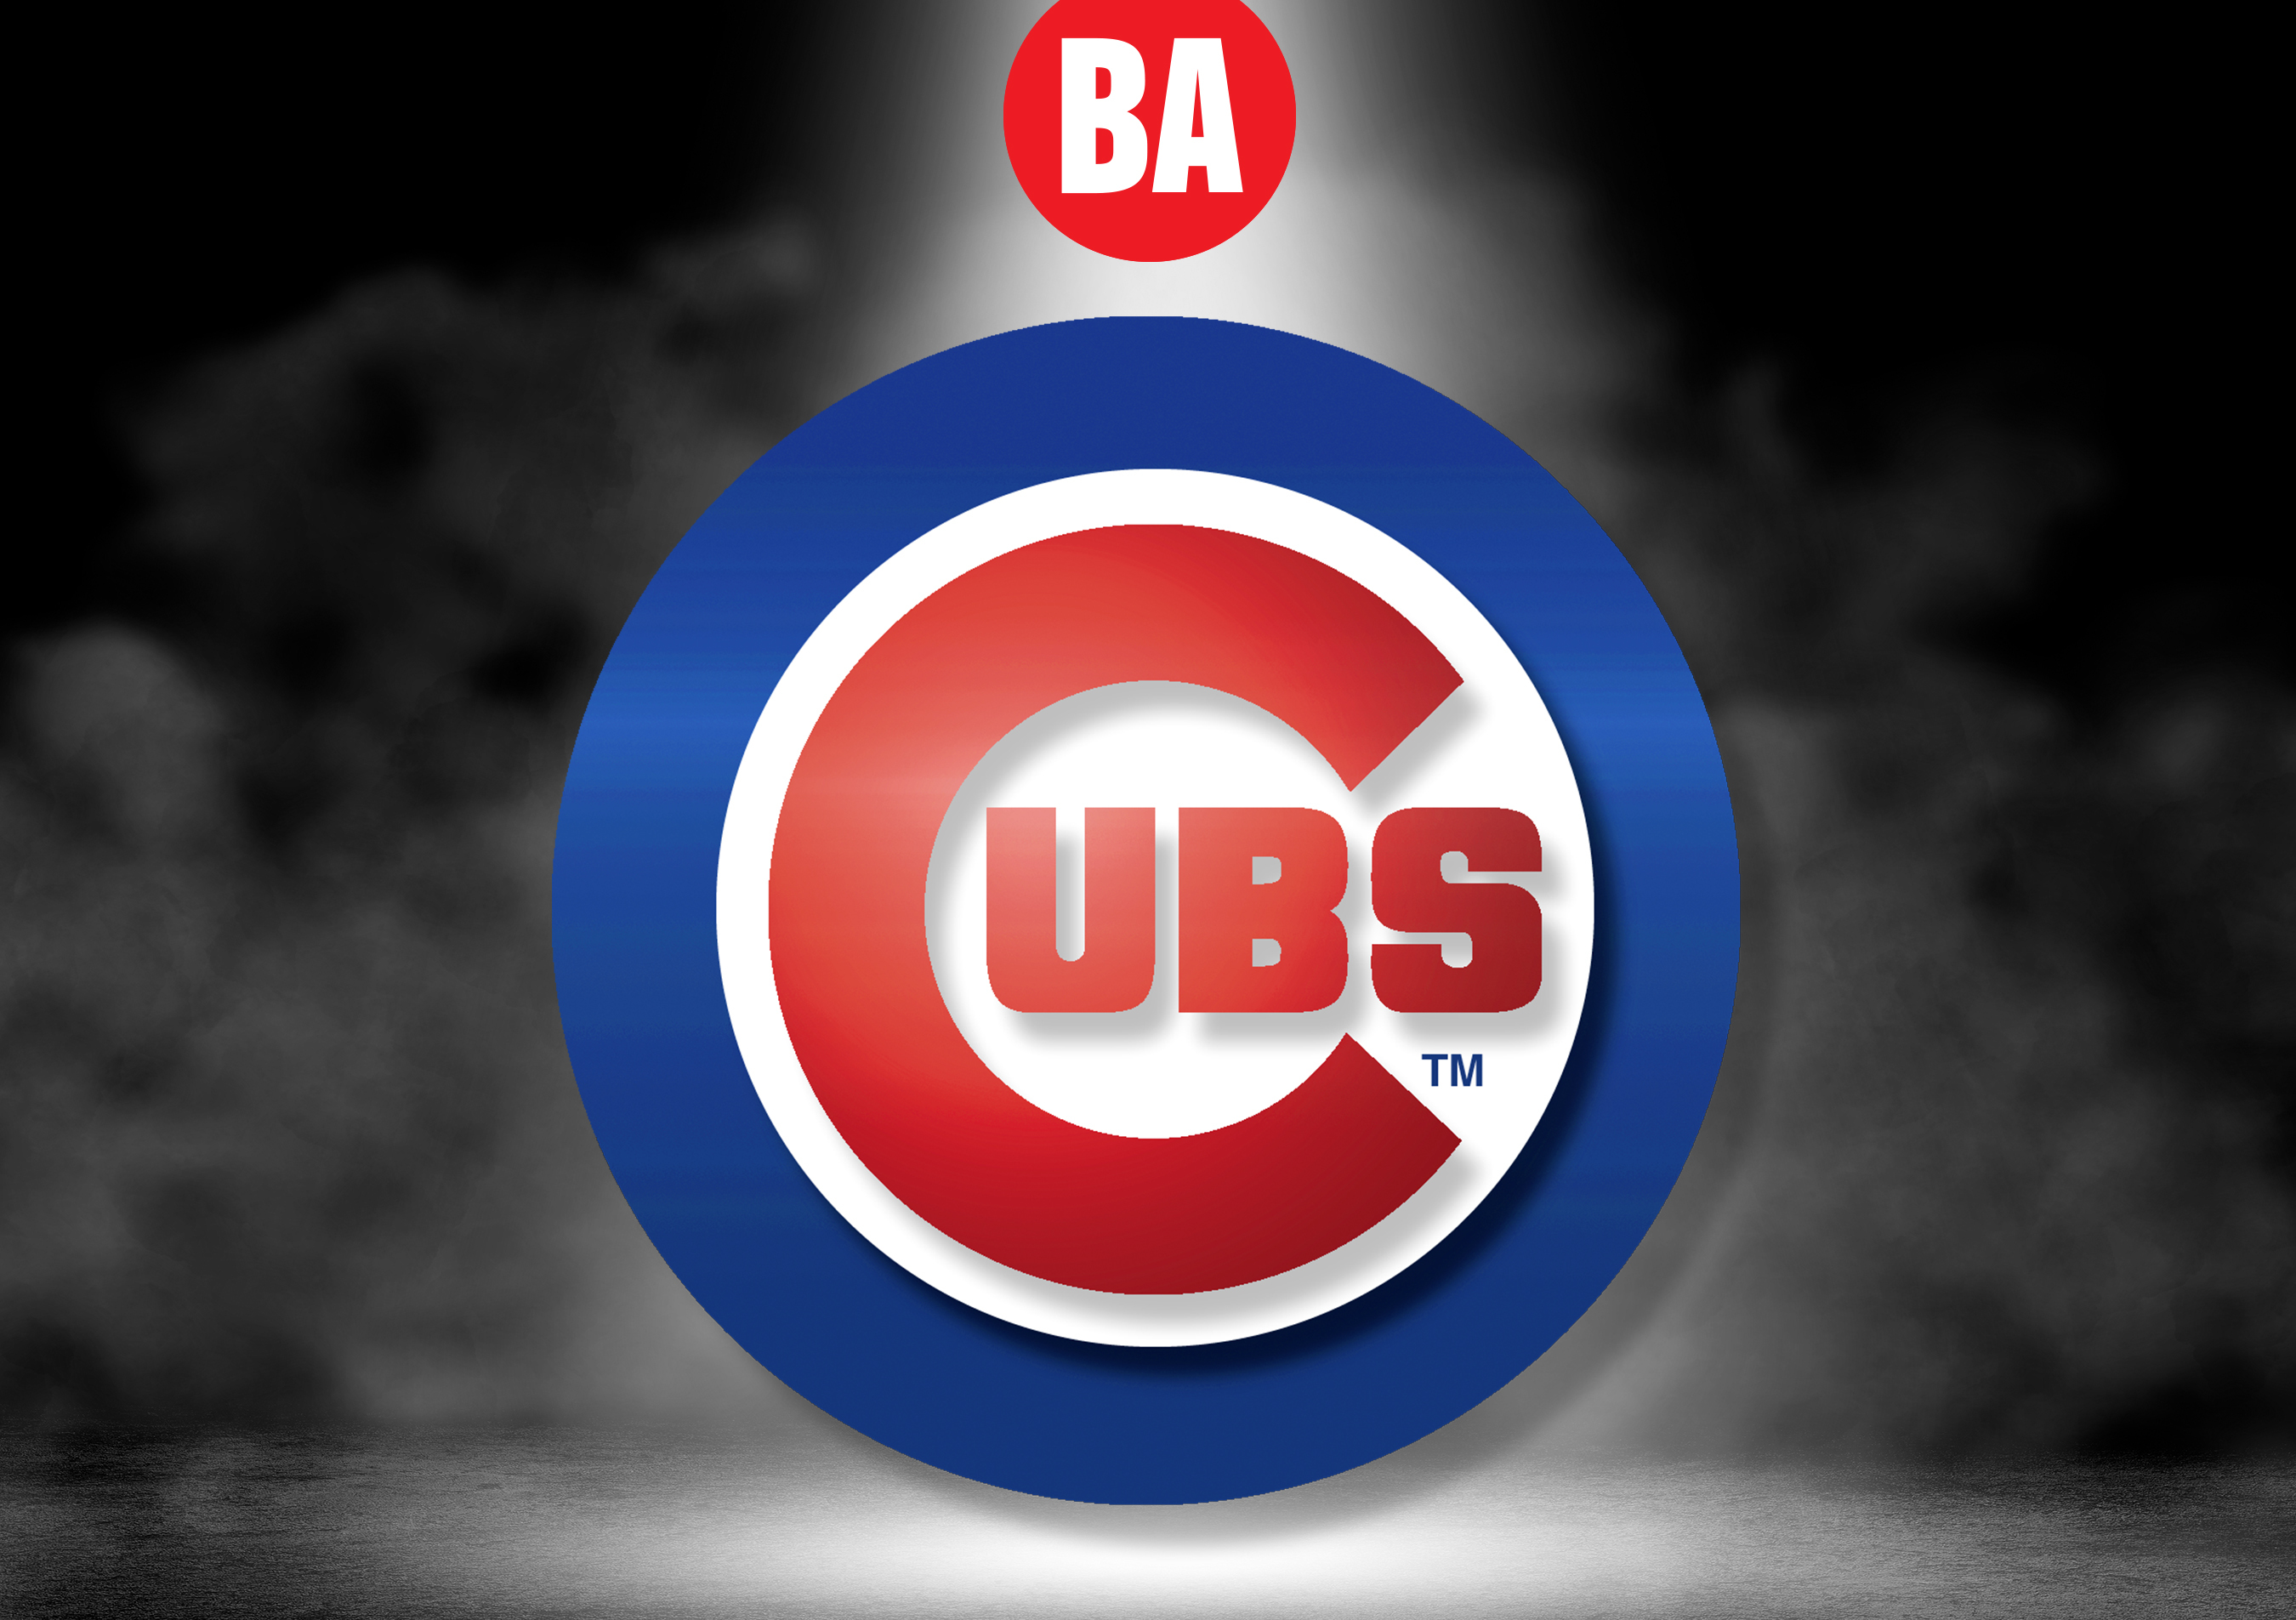 Download Chicago Cubs World Championship Wallpaper